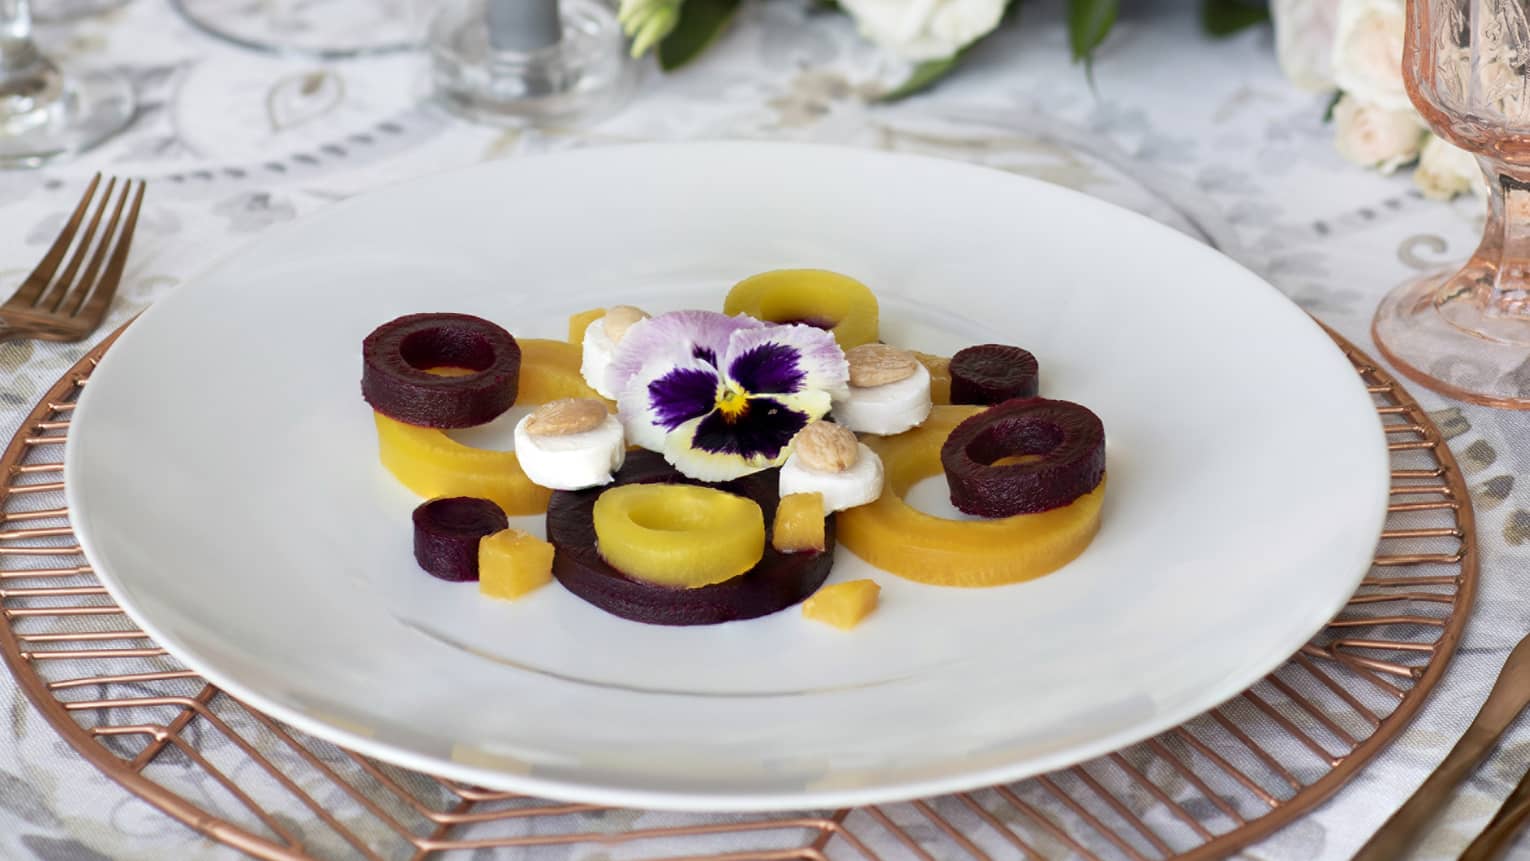 White roses behind plate with round beets, goat cheese, nuts and flower